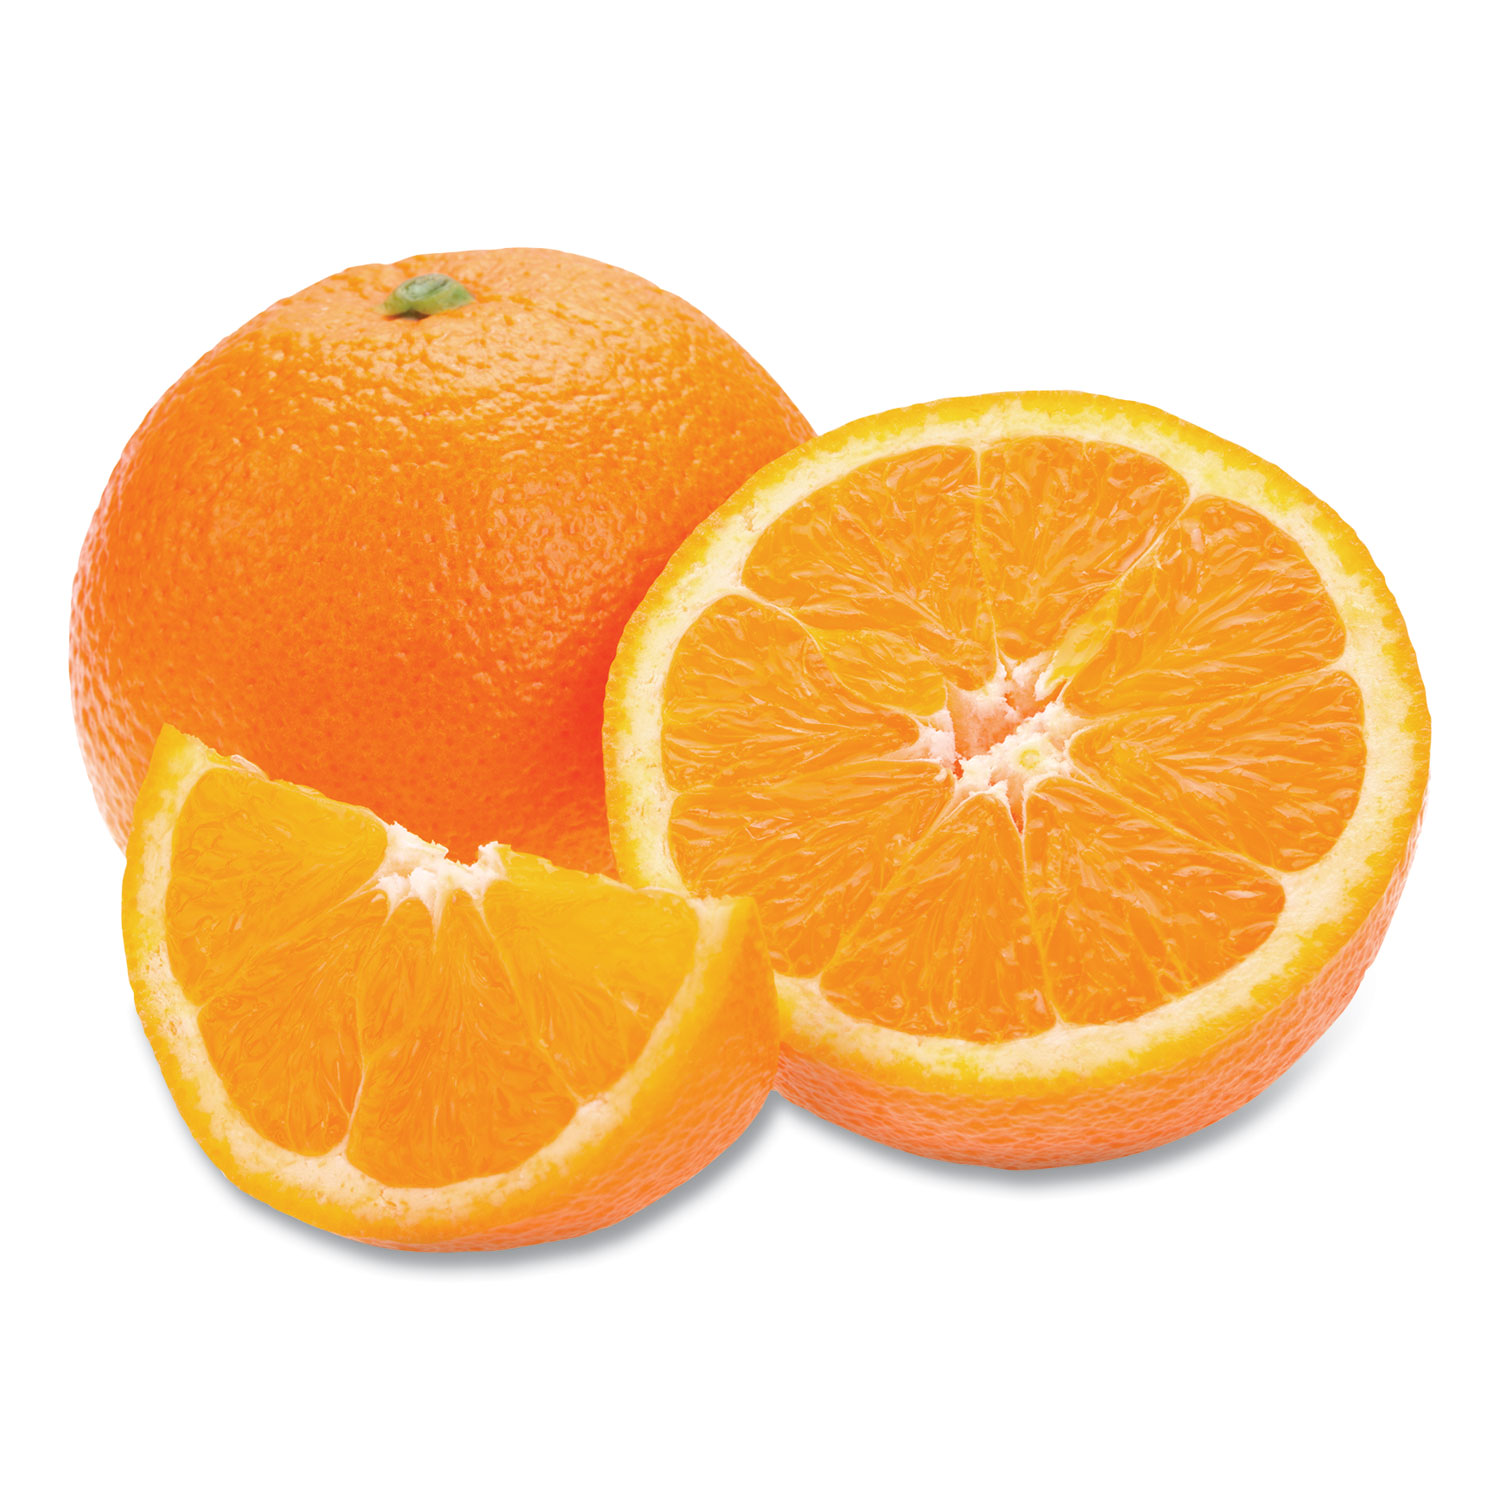  National Brand 11025 Fresh Premium Seedless Oranges, 8 lbs, Free Delivery in 1-4 Business Days (GRR90000081) 